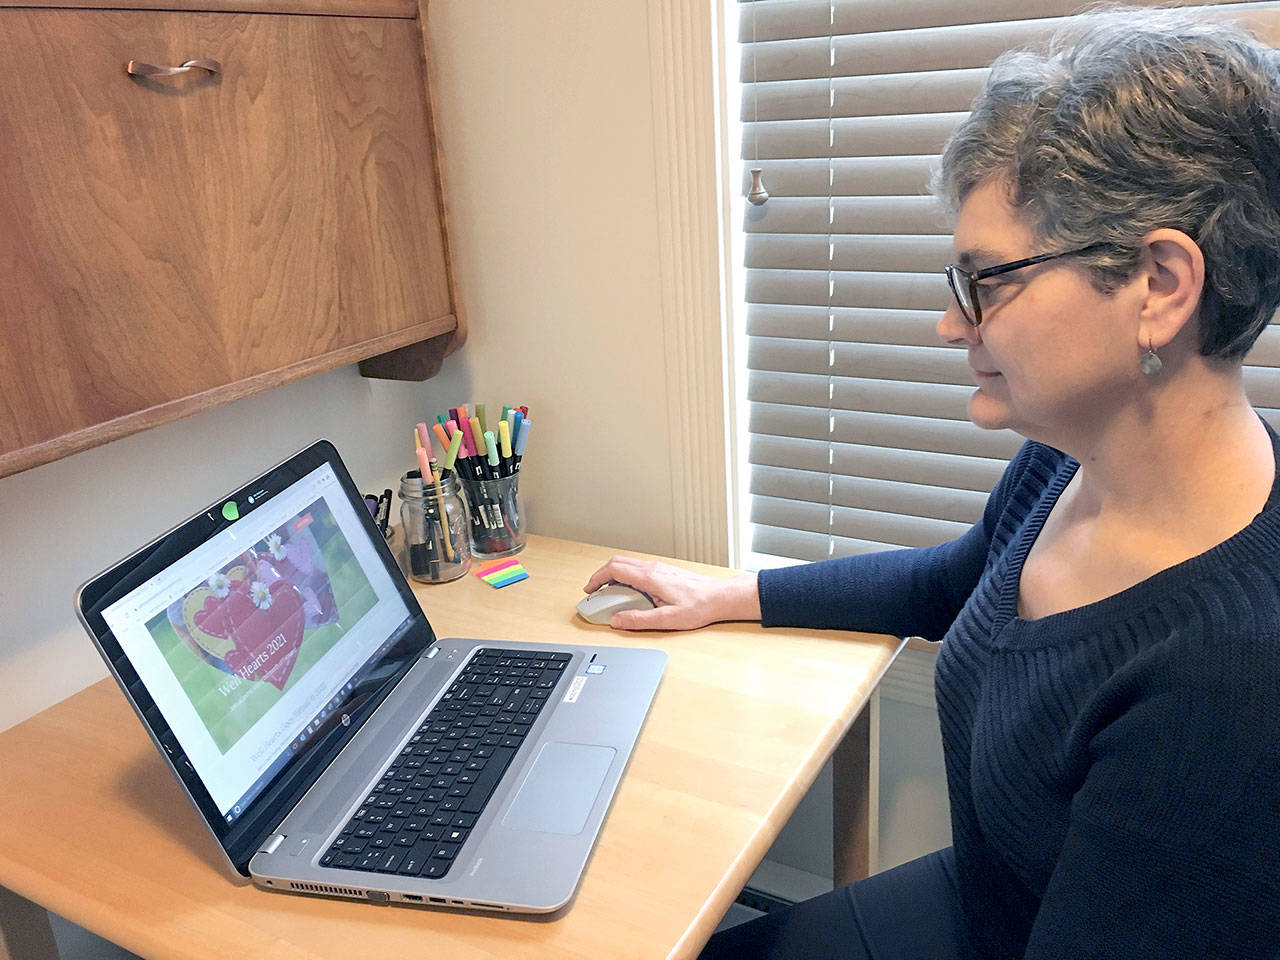 The Jefferson Healthcare Foundation’s Kris Becker codesigned the new Well Hearts website offering a guided meditation, an art class and other heart health-oriented activities. (Photo courtesy of the Jefferson Healthcare Foundation)